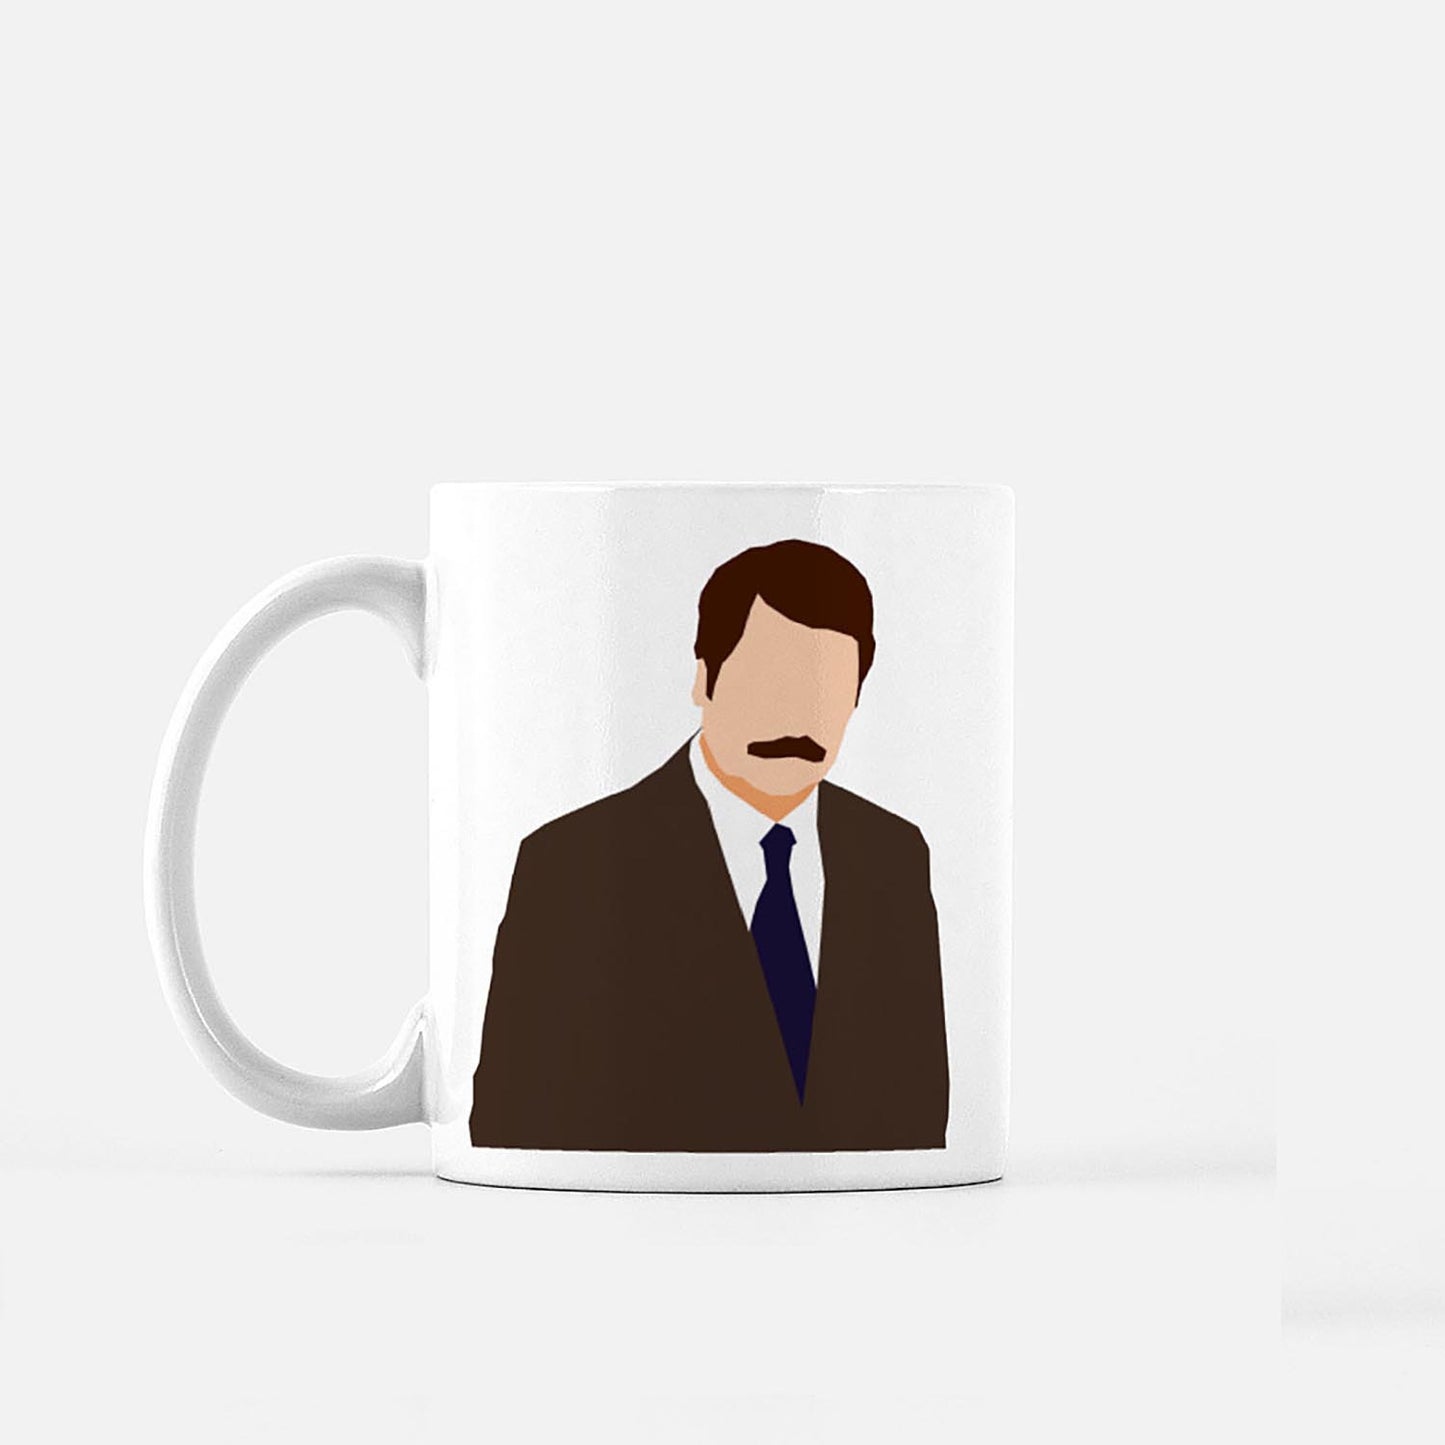 Parks and Rec mug featuring Ron Swanson